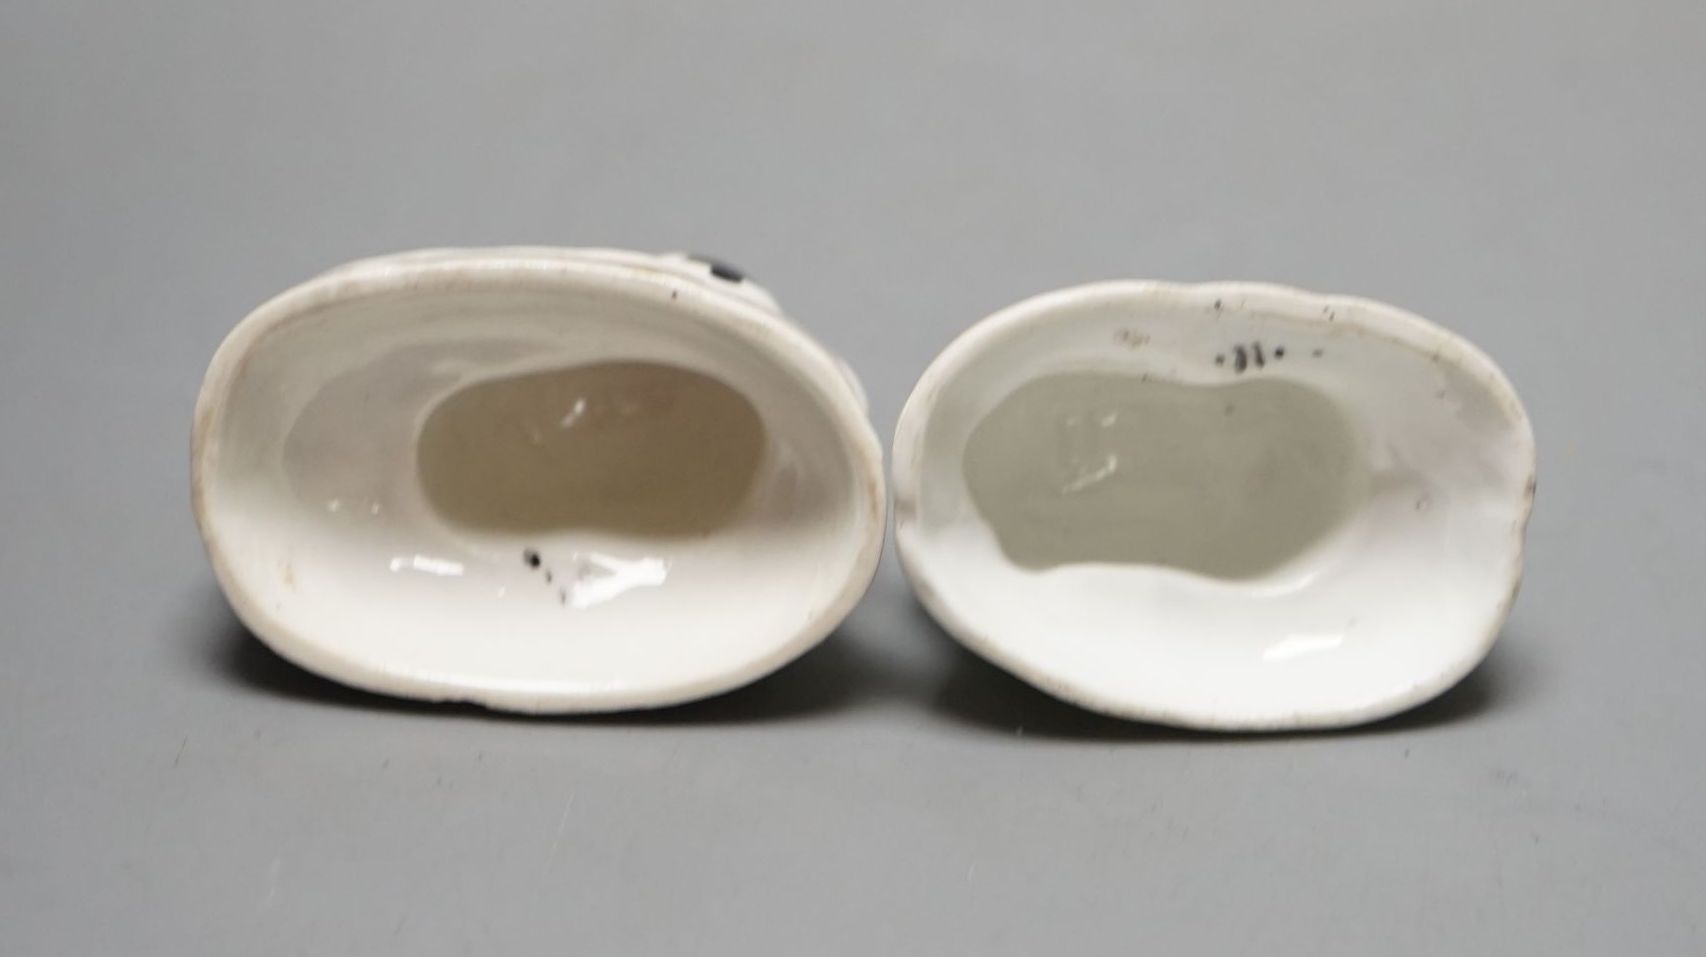 Two Staffordshire porcelain toy models of rabbits, c.1830–50, Provenance: Dennis G. Rice collection, 5 cms wide.